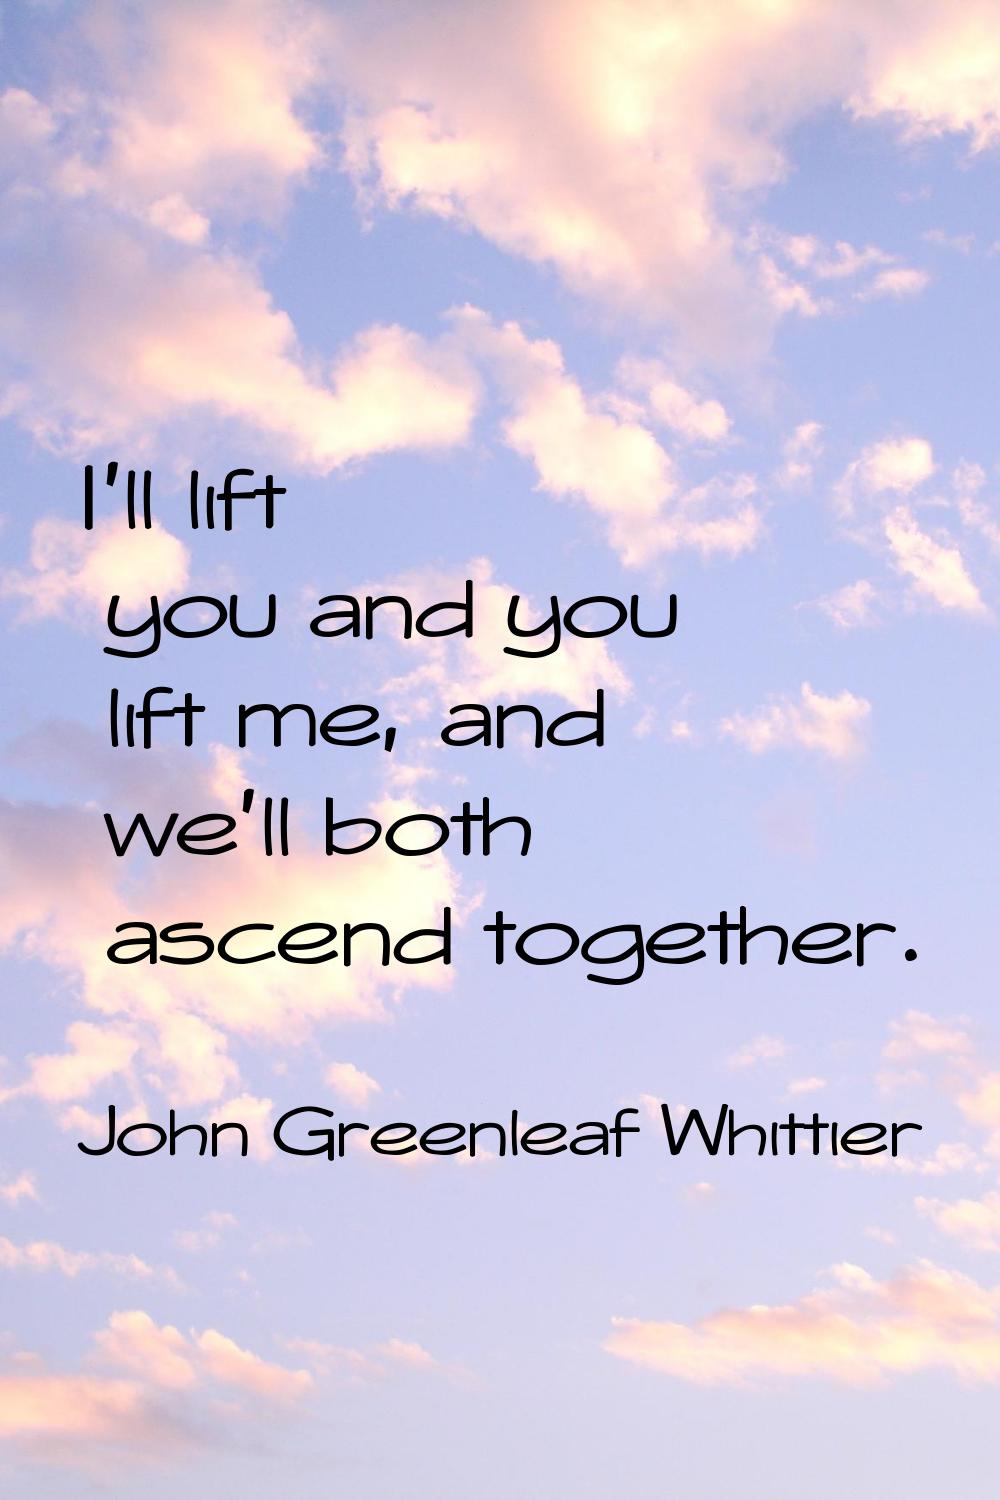 I'll lift you and you lift me, and we'll both ascend together.